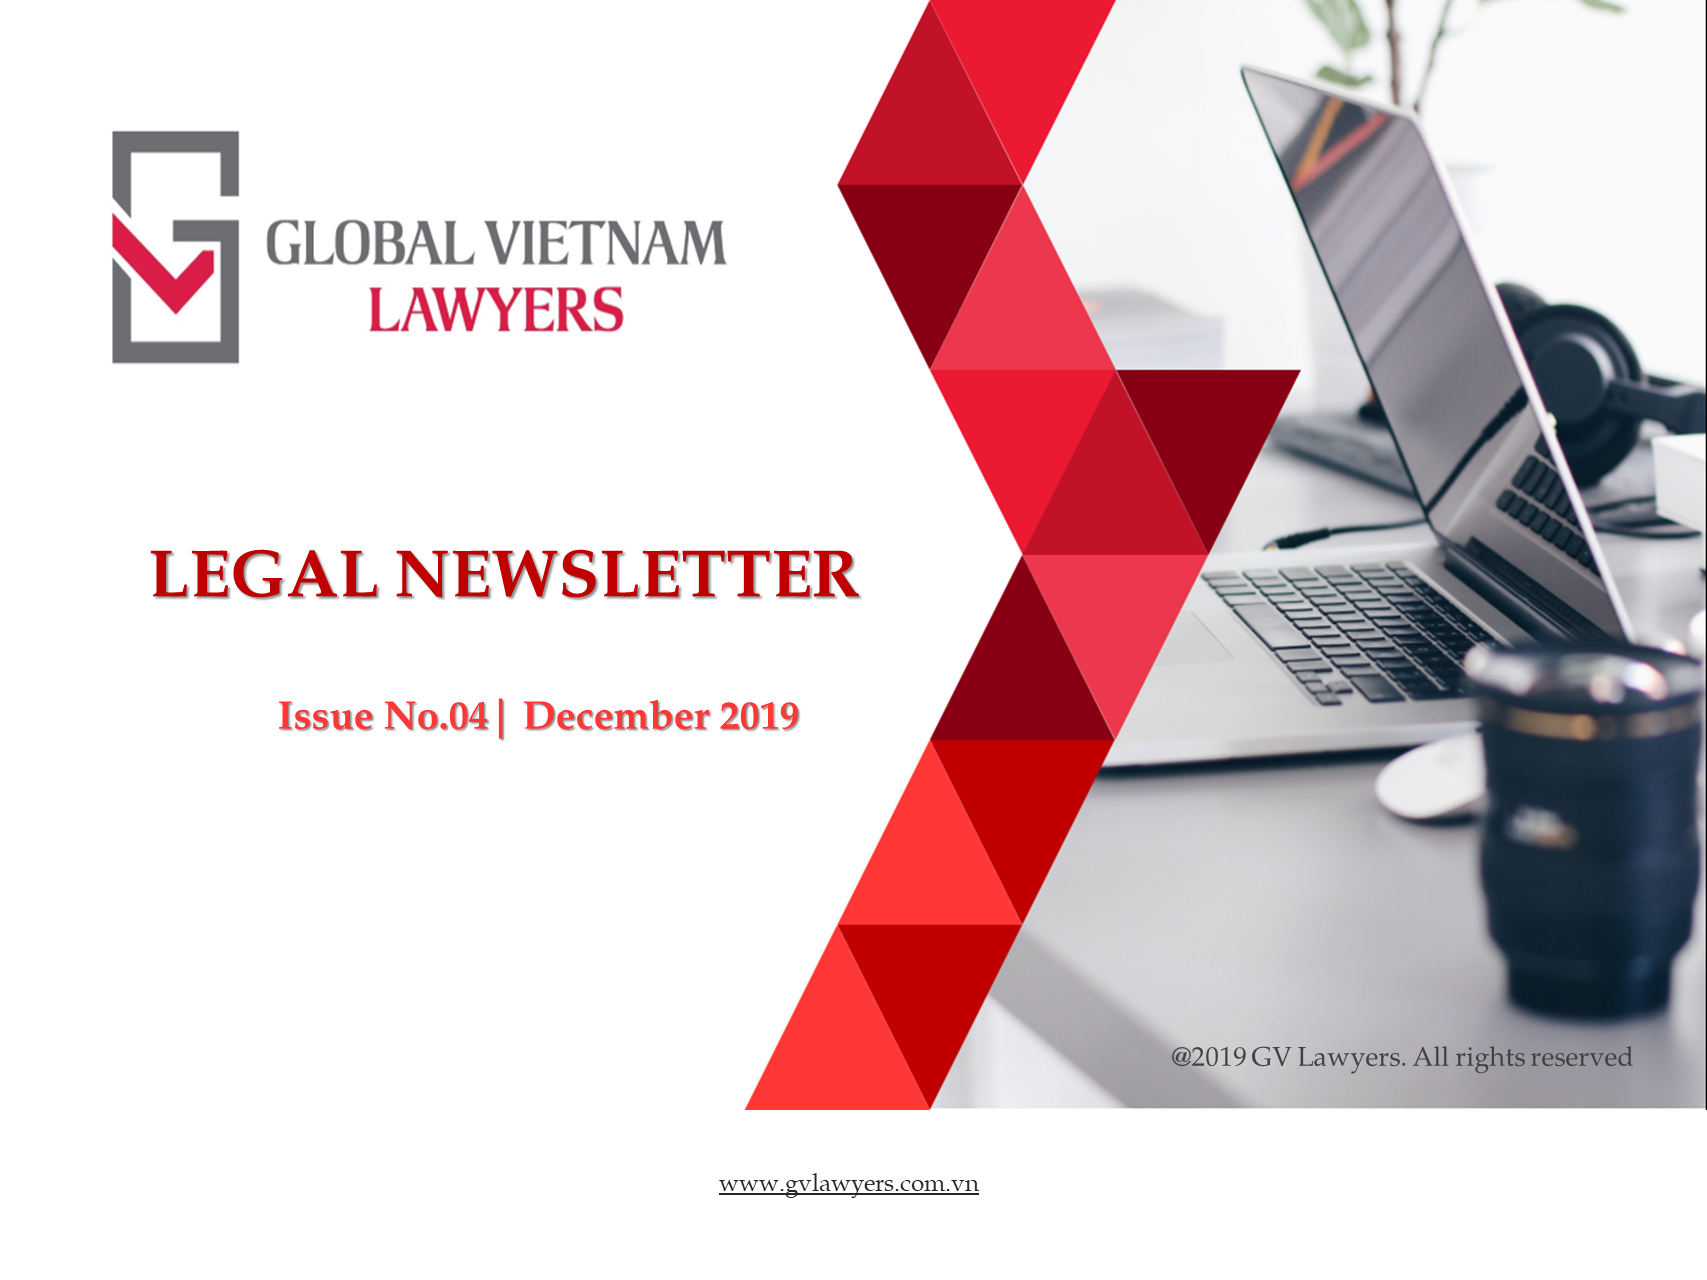 ENLegal Newsletter IssueNo2 Oct2019 GVLawyers